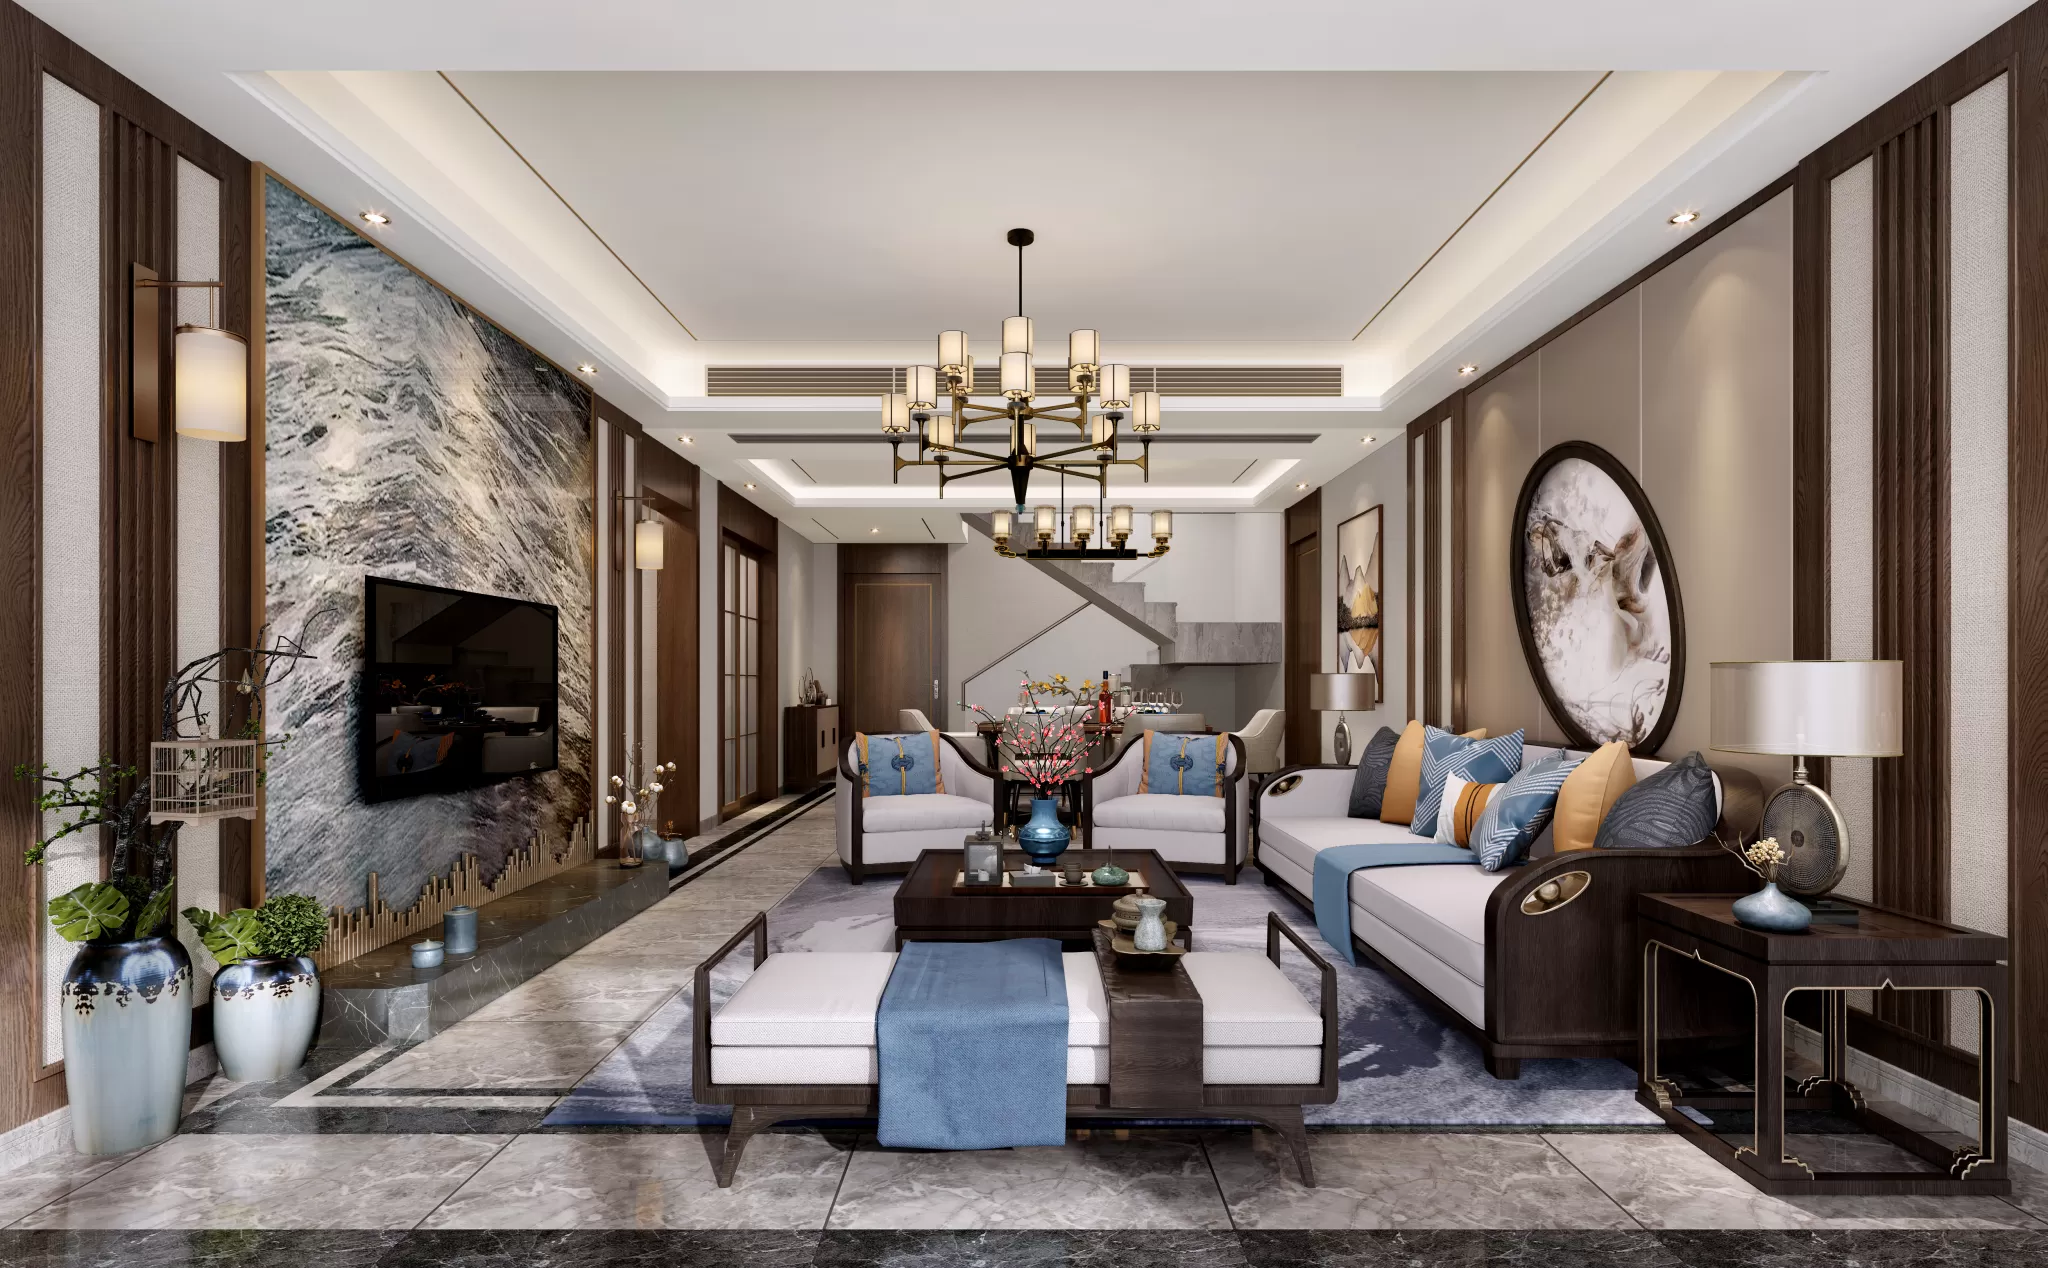 DESMOD INTERIOR 2021 (VRAY) – 4. LIVING ROOM – CHINESE – 029